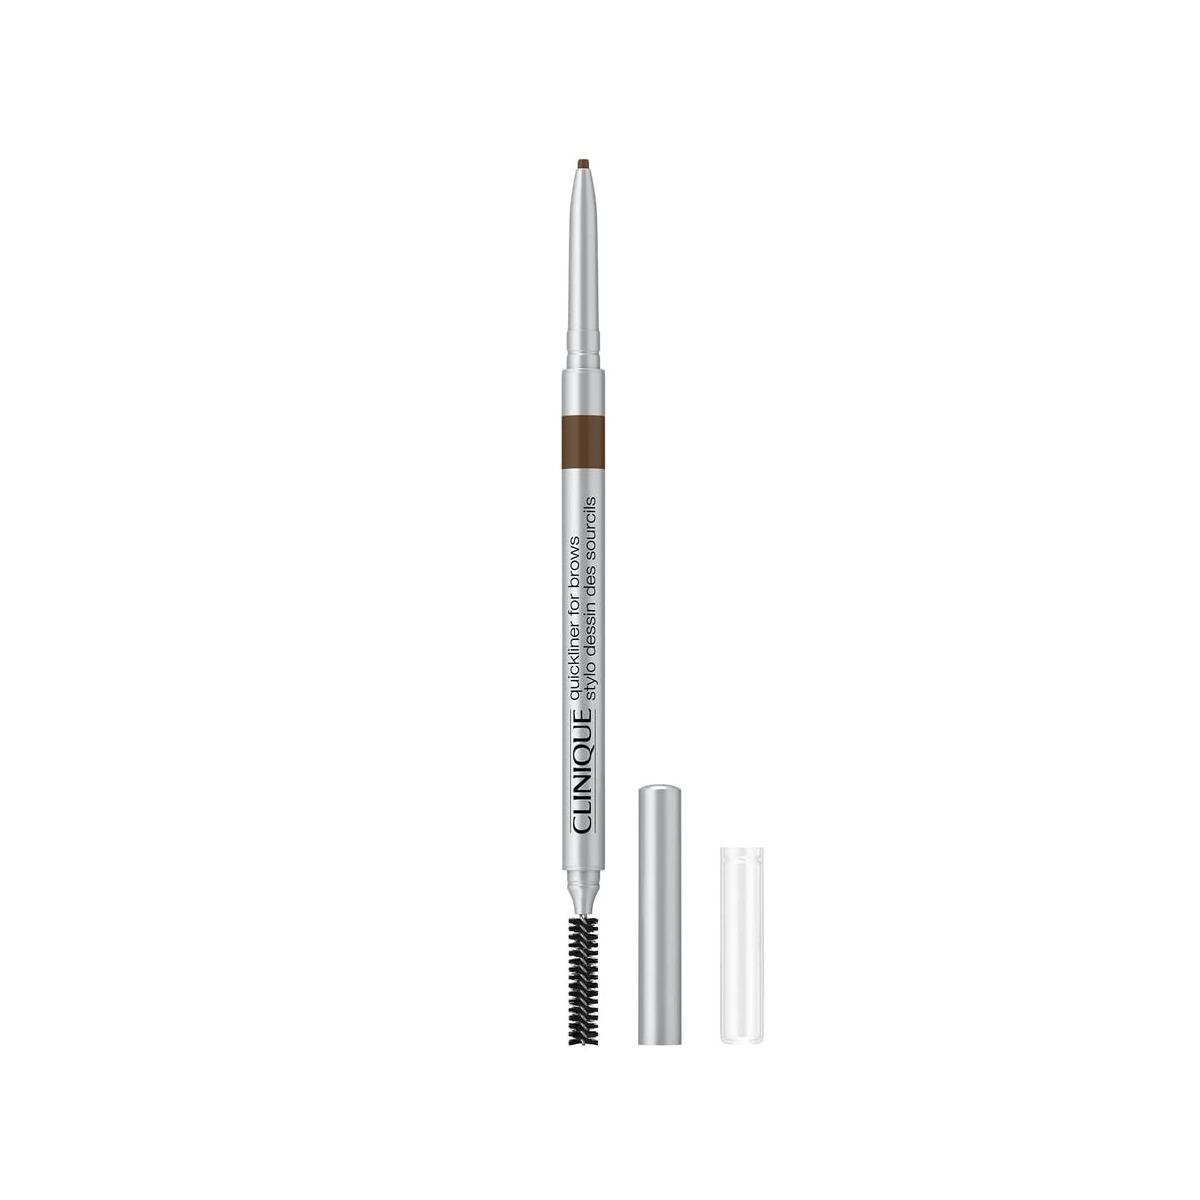 Quickliner for brows 04 deep brown